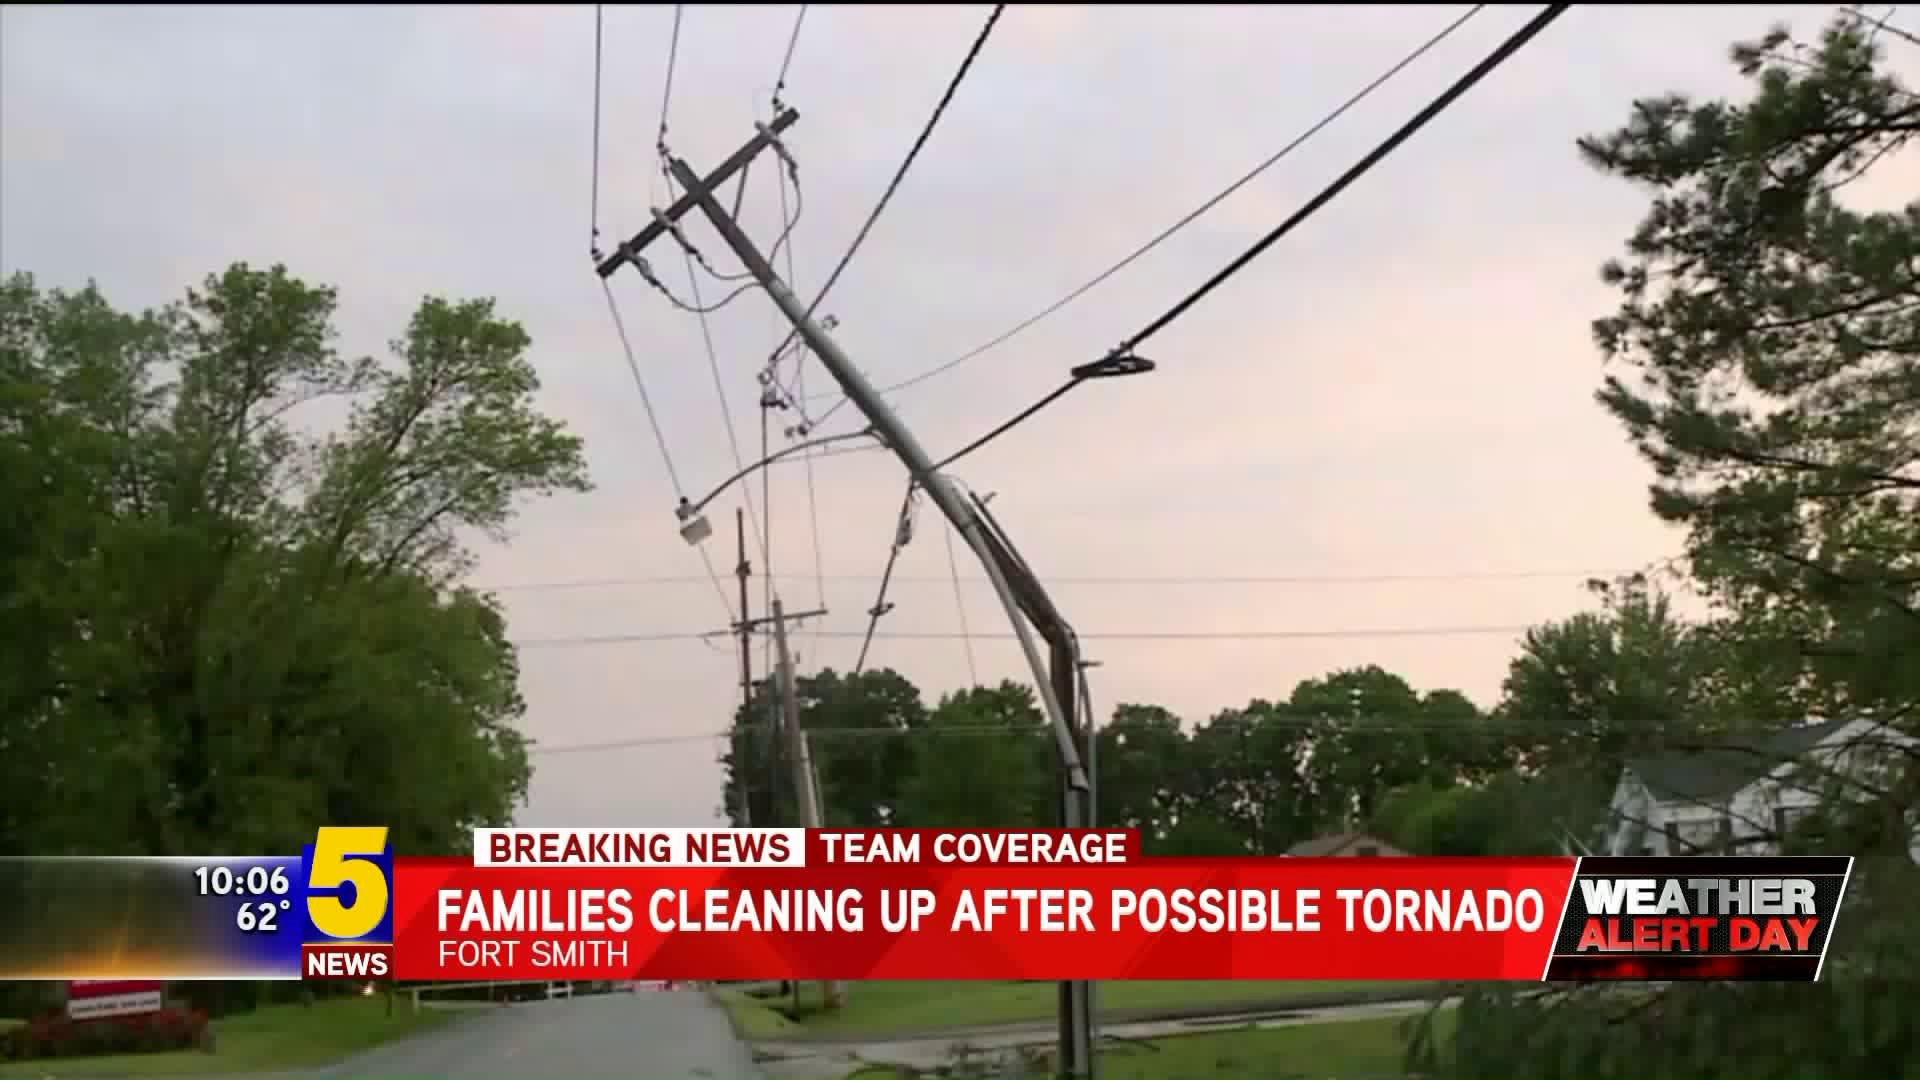 Families Cleaning Up After Possible Tornado